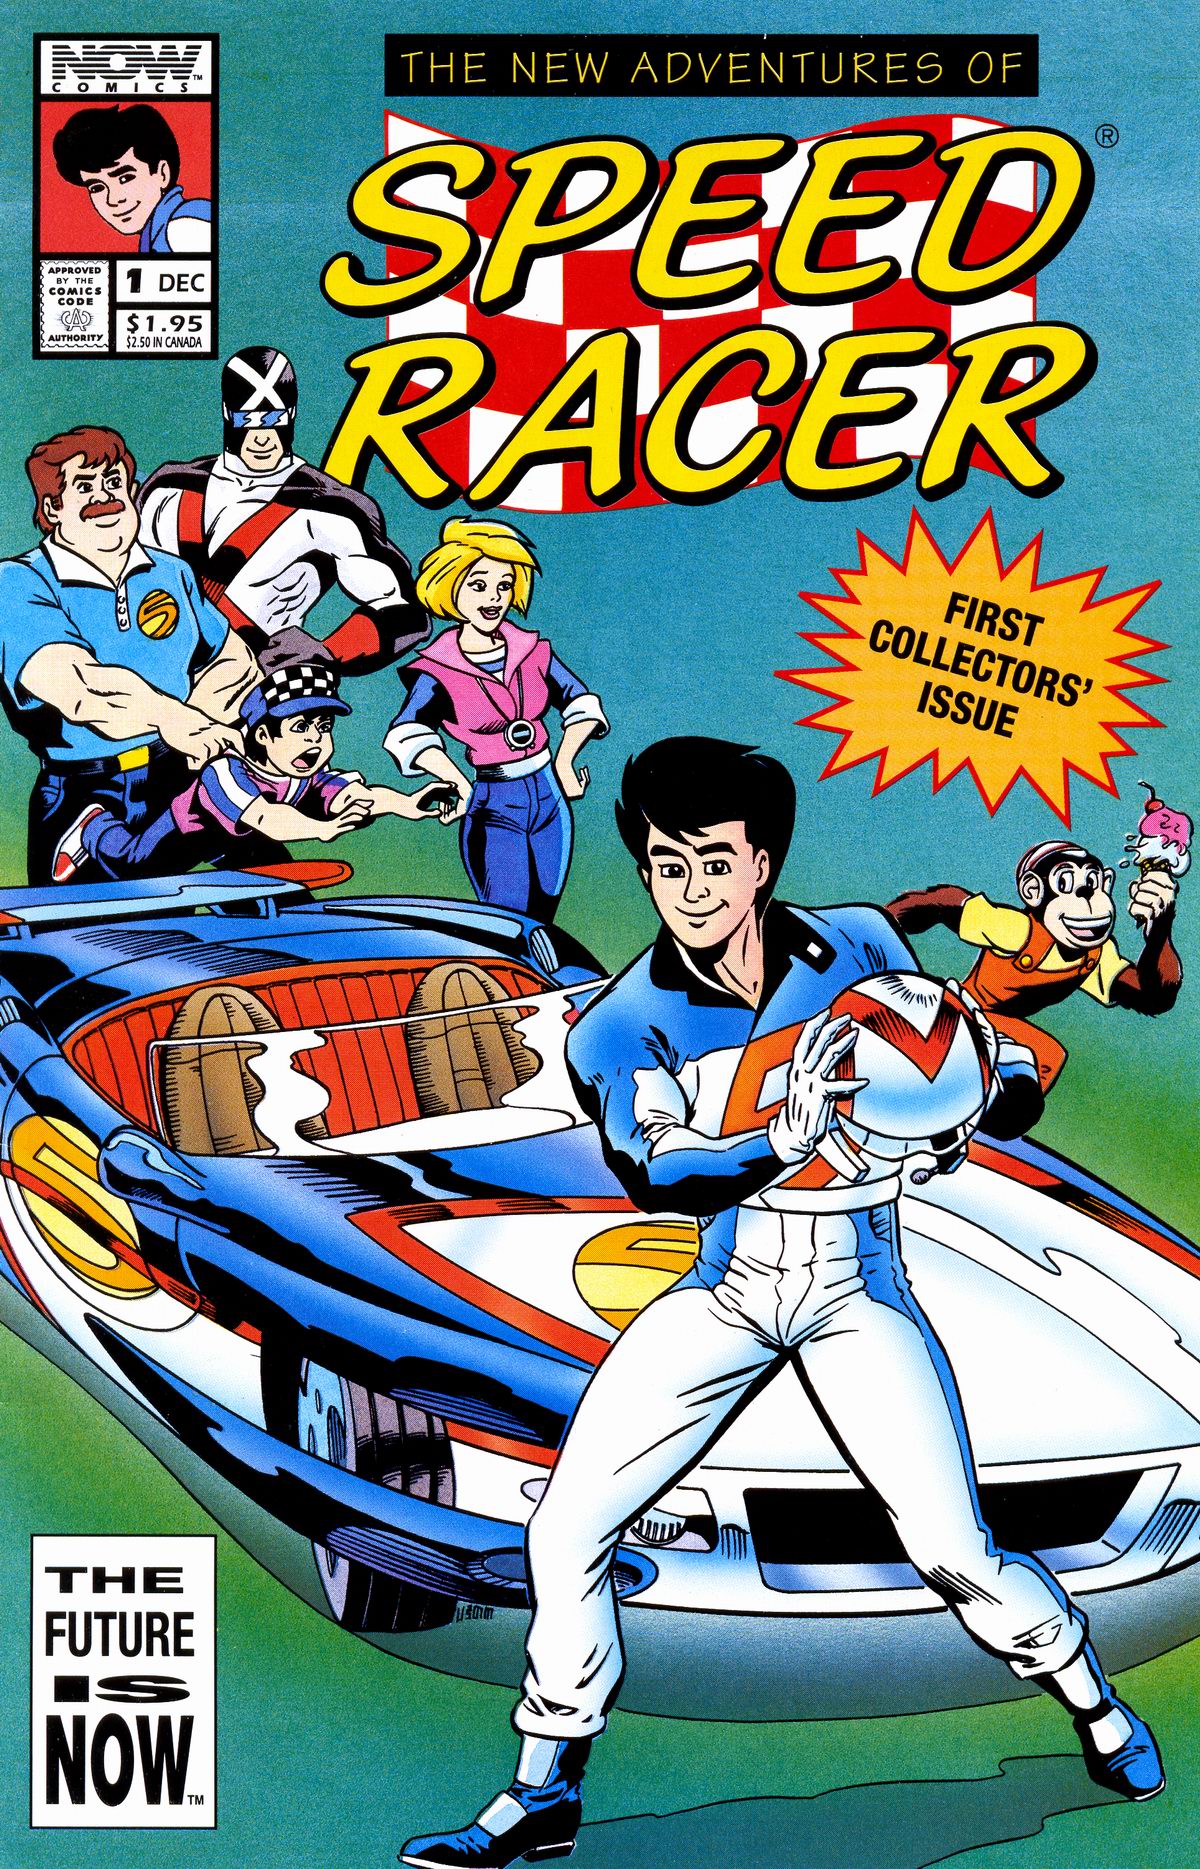 Read online The New Adventures of Speed Racer comic -  Issue #1 - 1